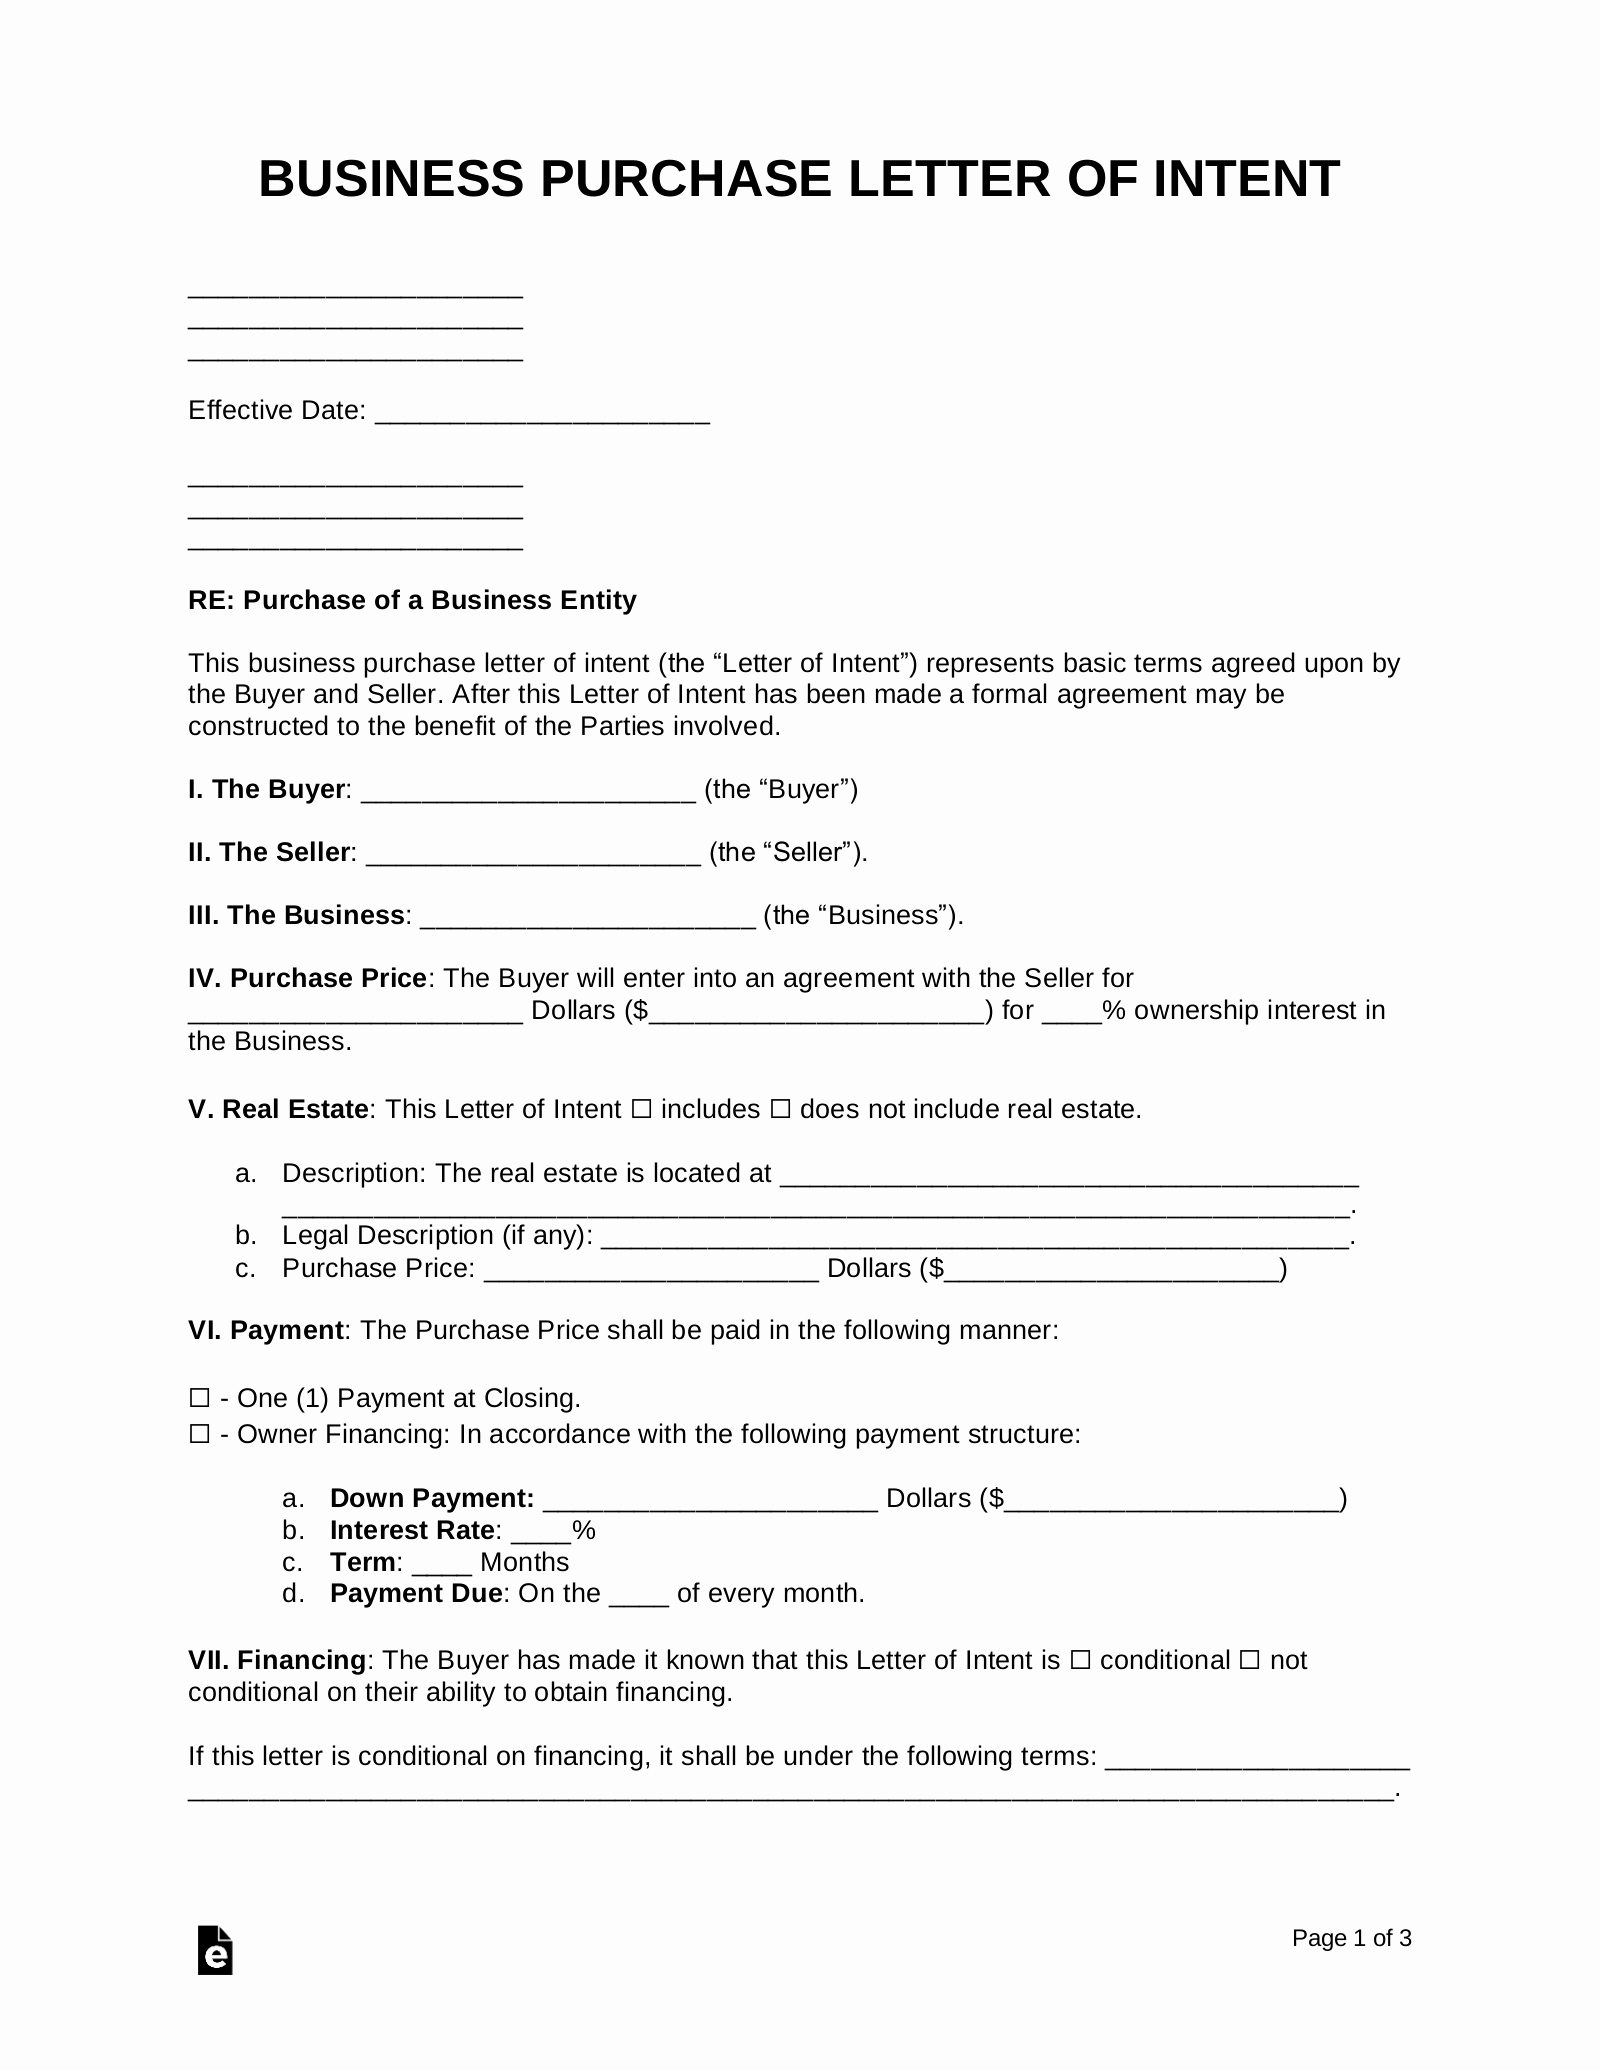 Simple Letter Of Intent to Purchase Property New Free Business Purchase Letter Of Intent Template Pdf